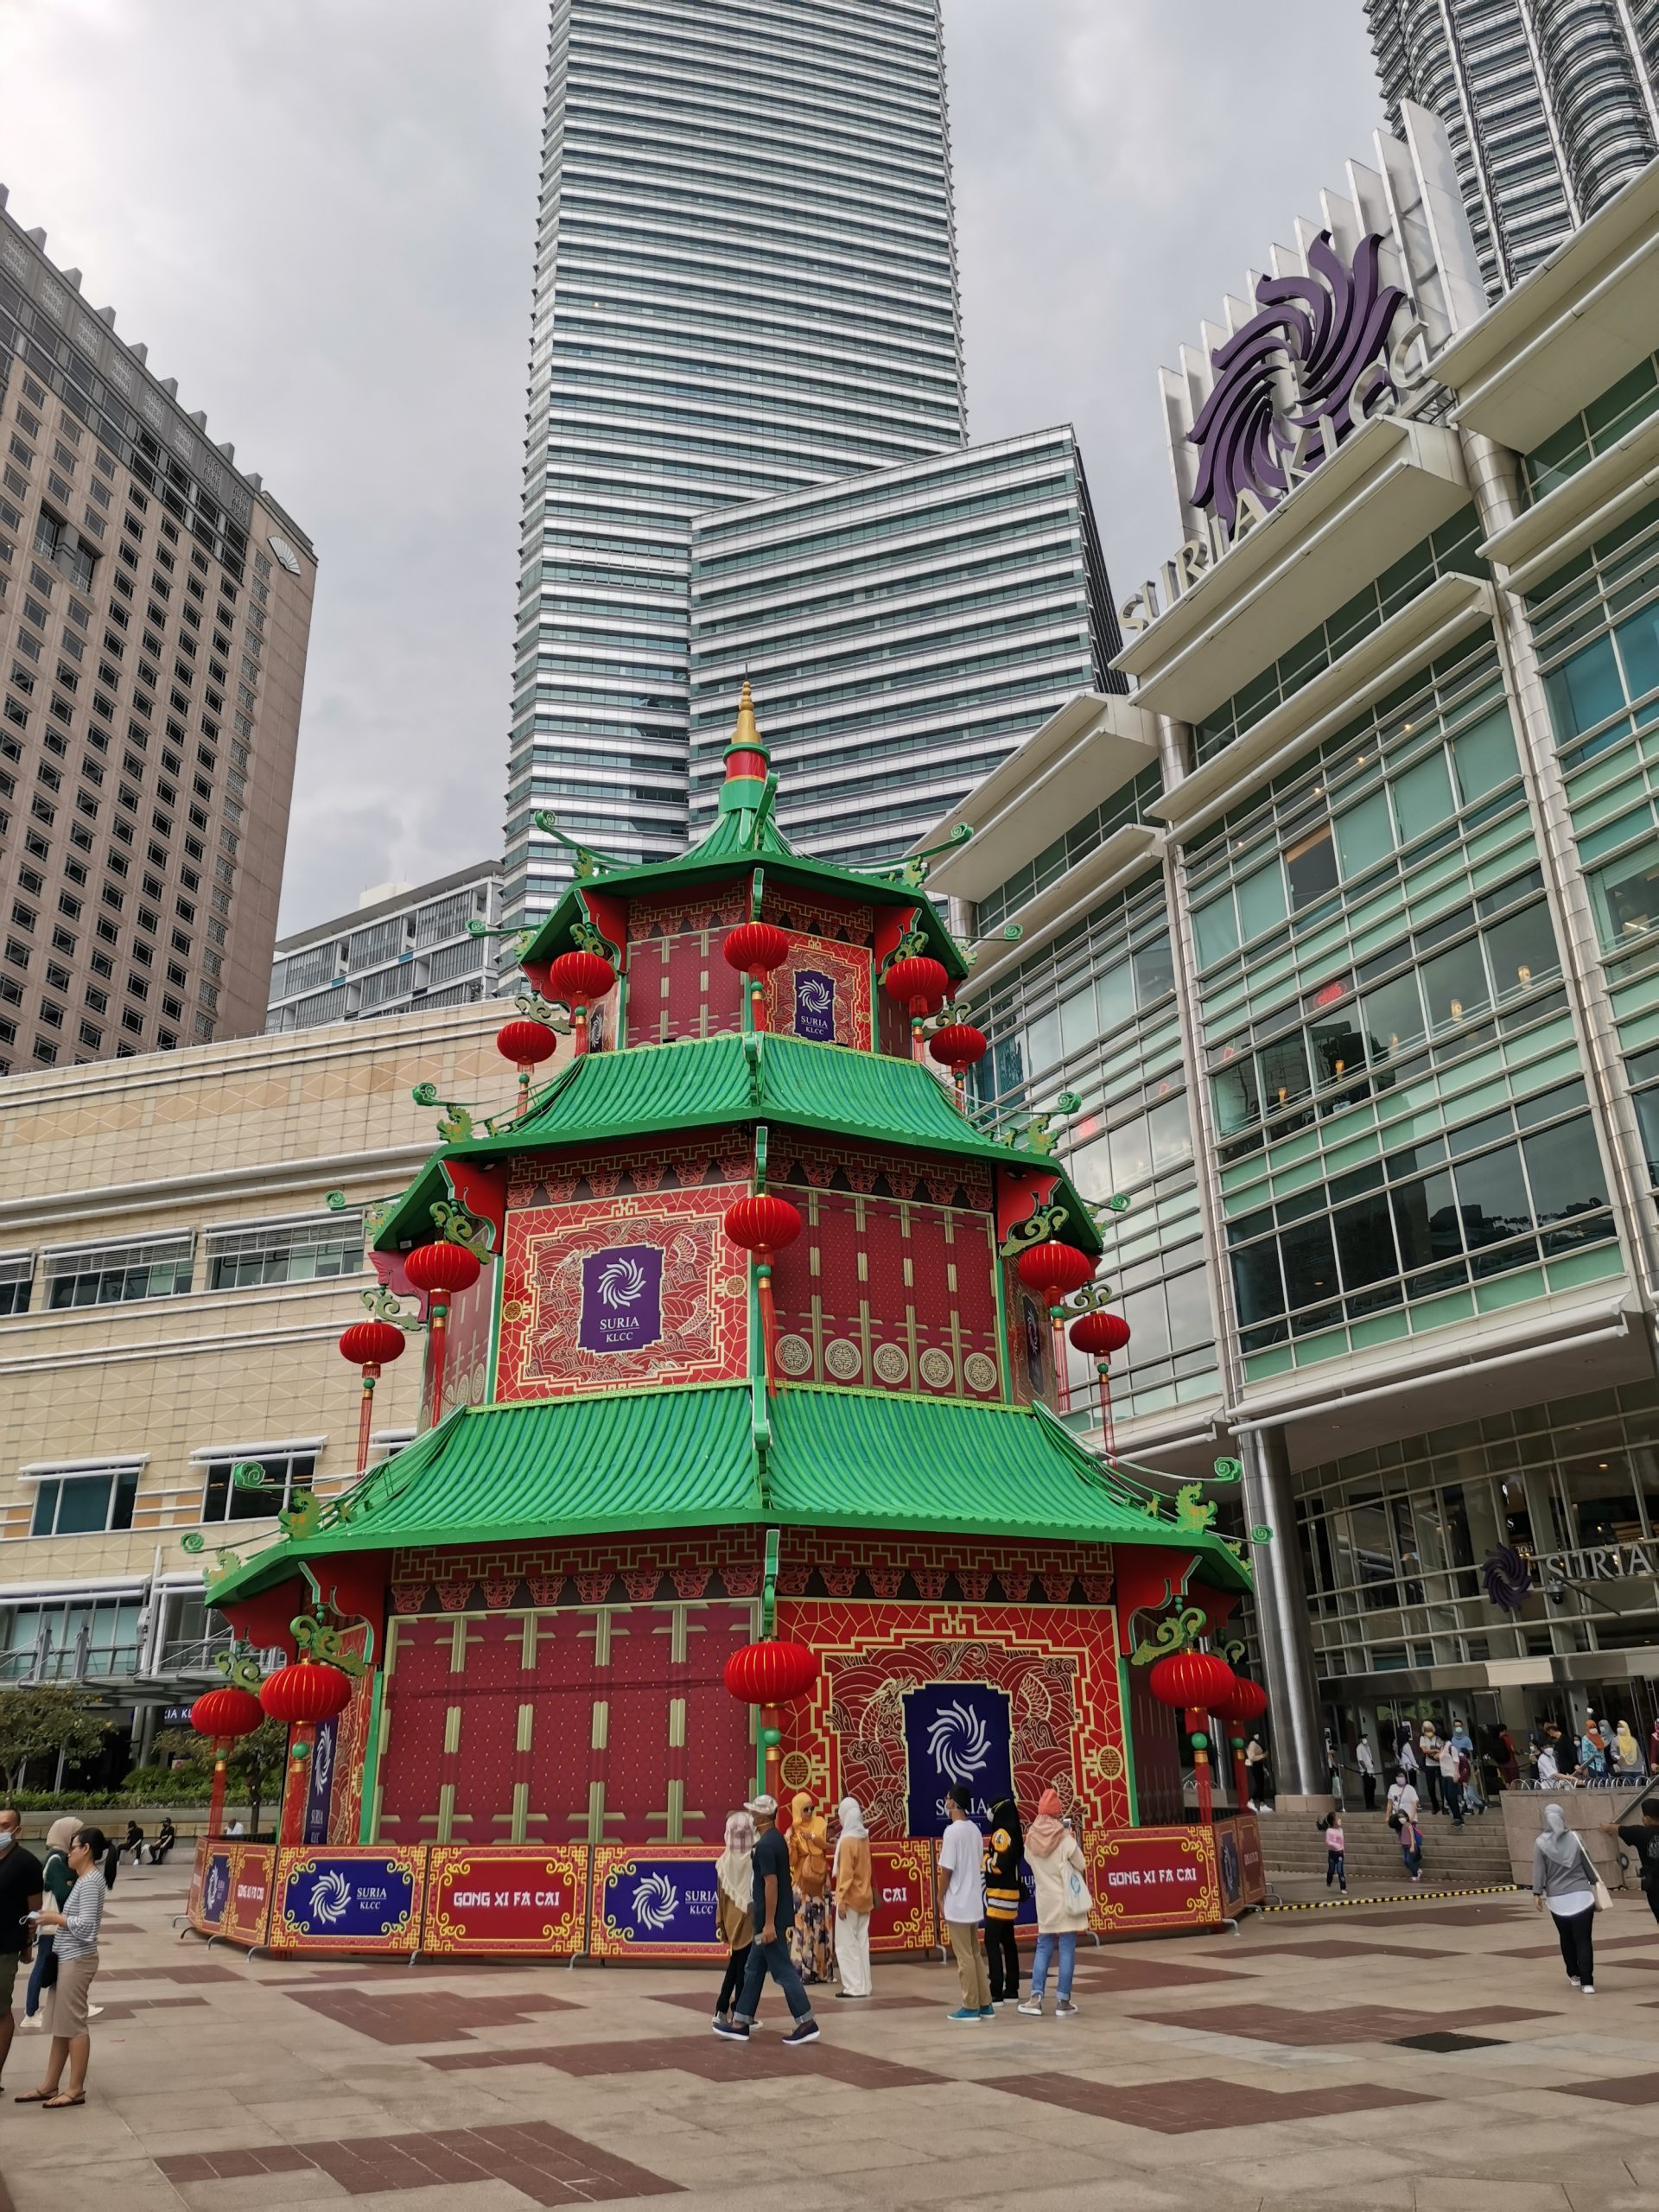 'is this for cny or ching ming? ' suria klcc's pagoda decoration bashed by netizens | weirdkaya